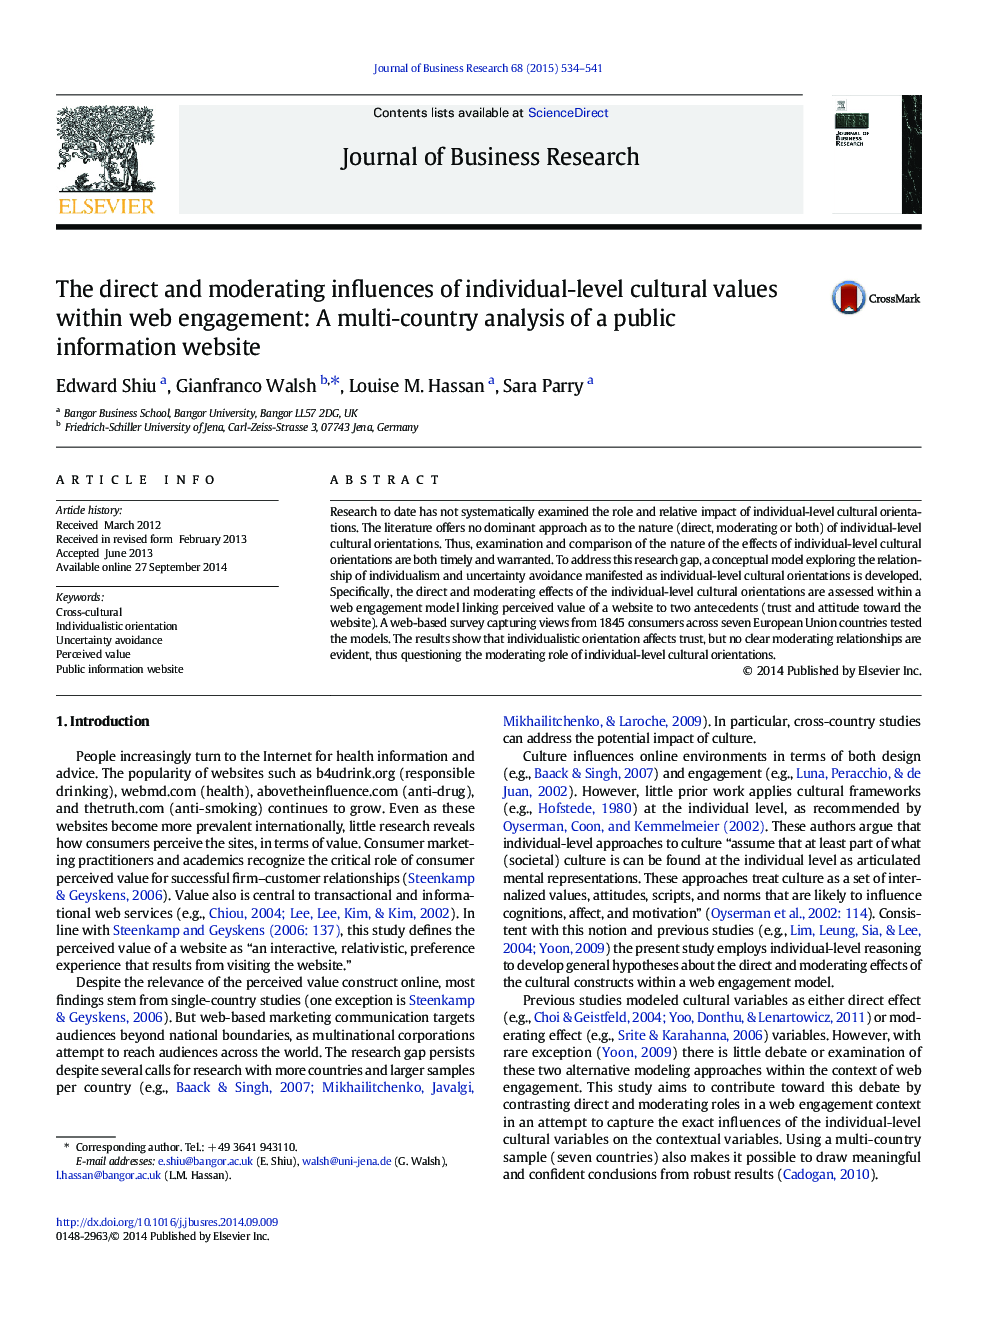 The direct and moderating influences of individual-level cultural values within web engagement: A multi-country analysis of a public information website